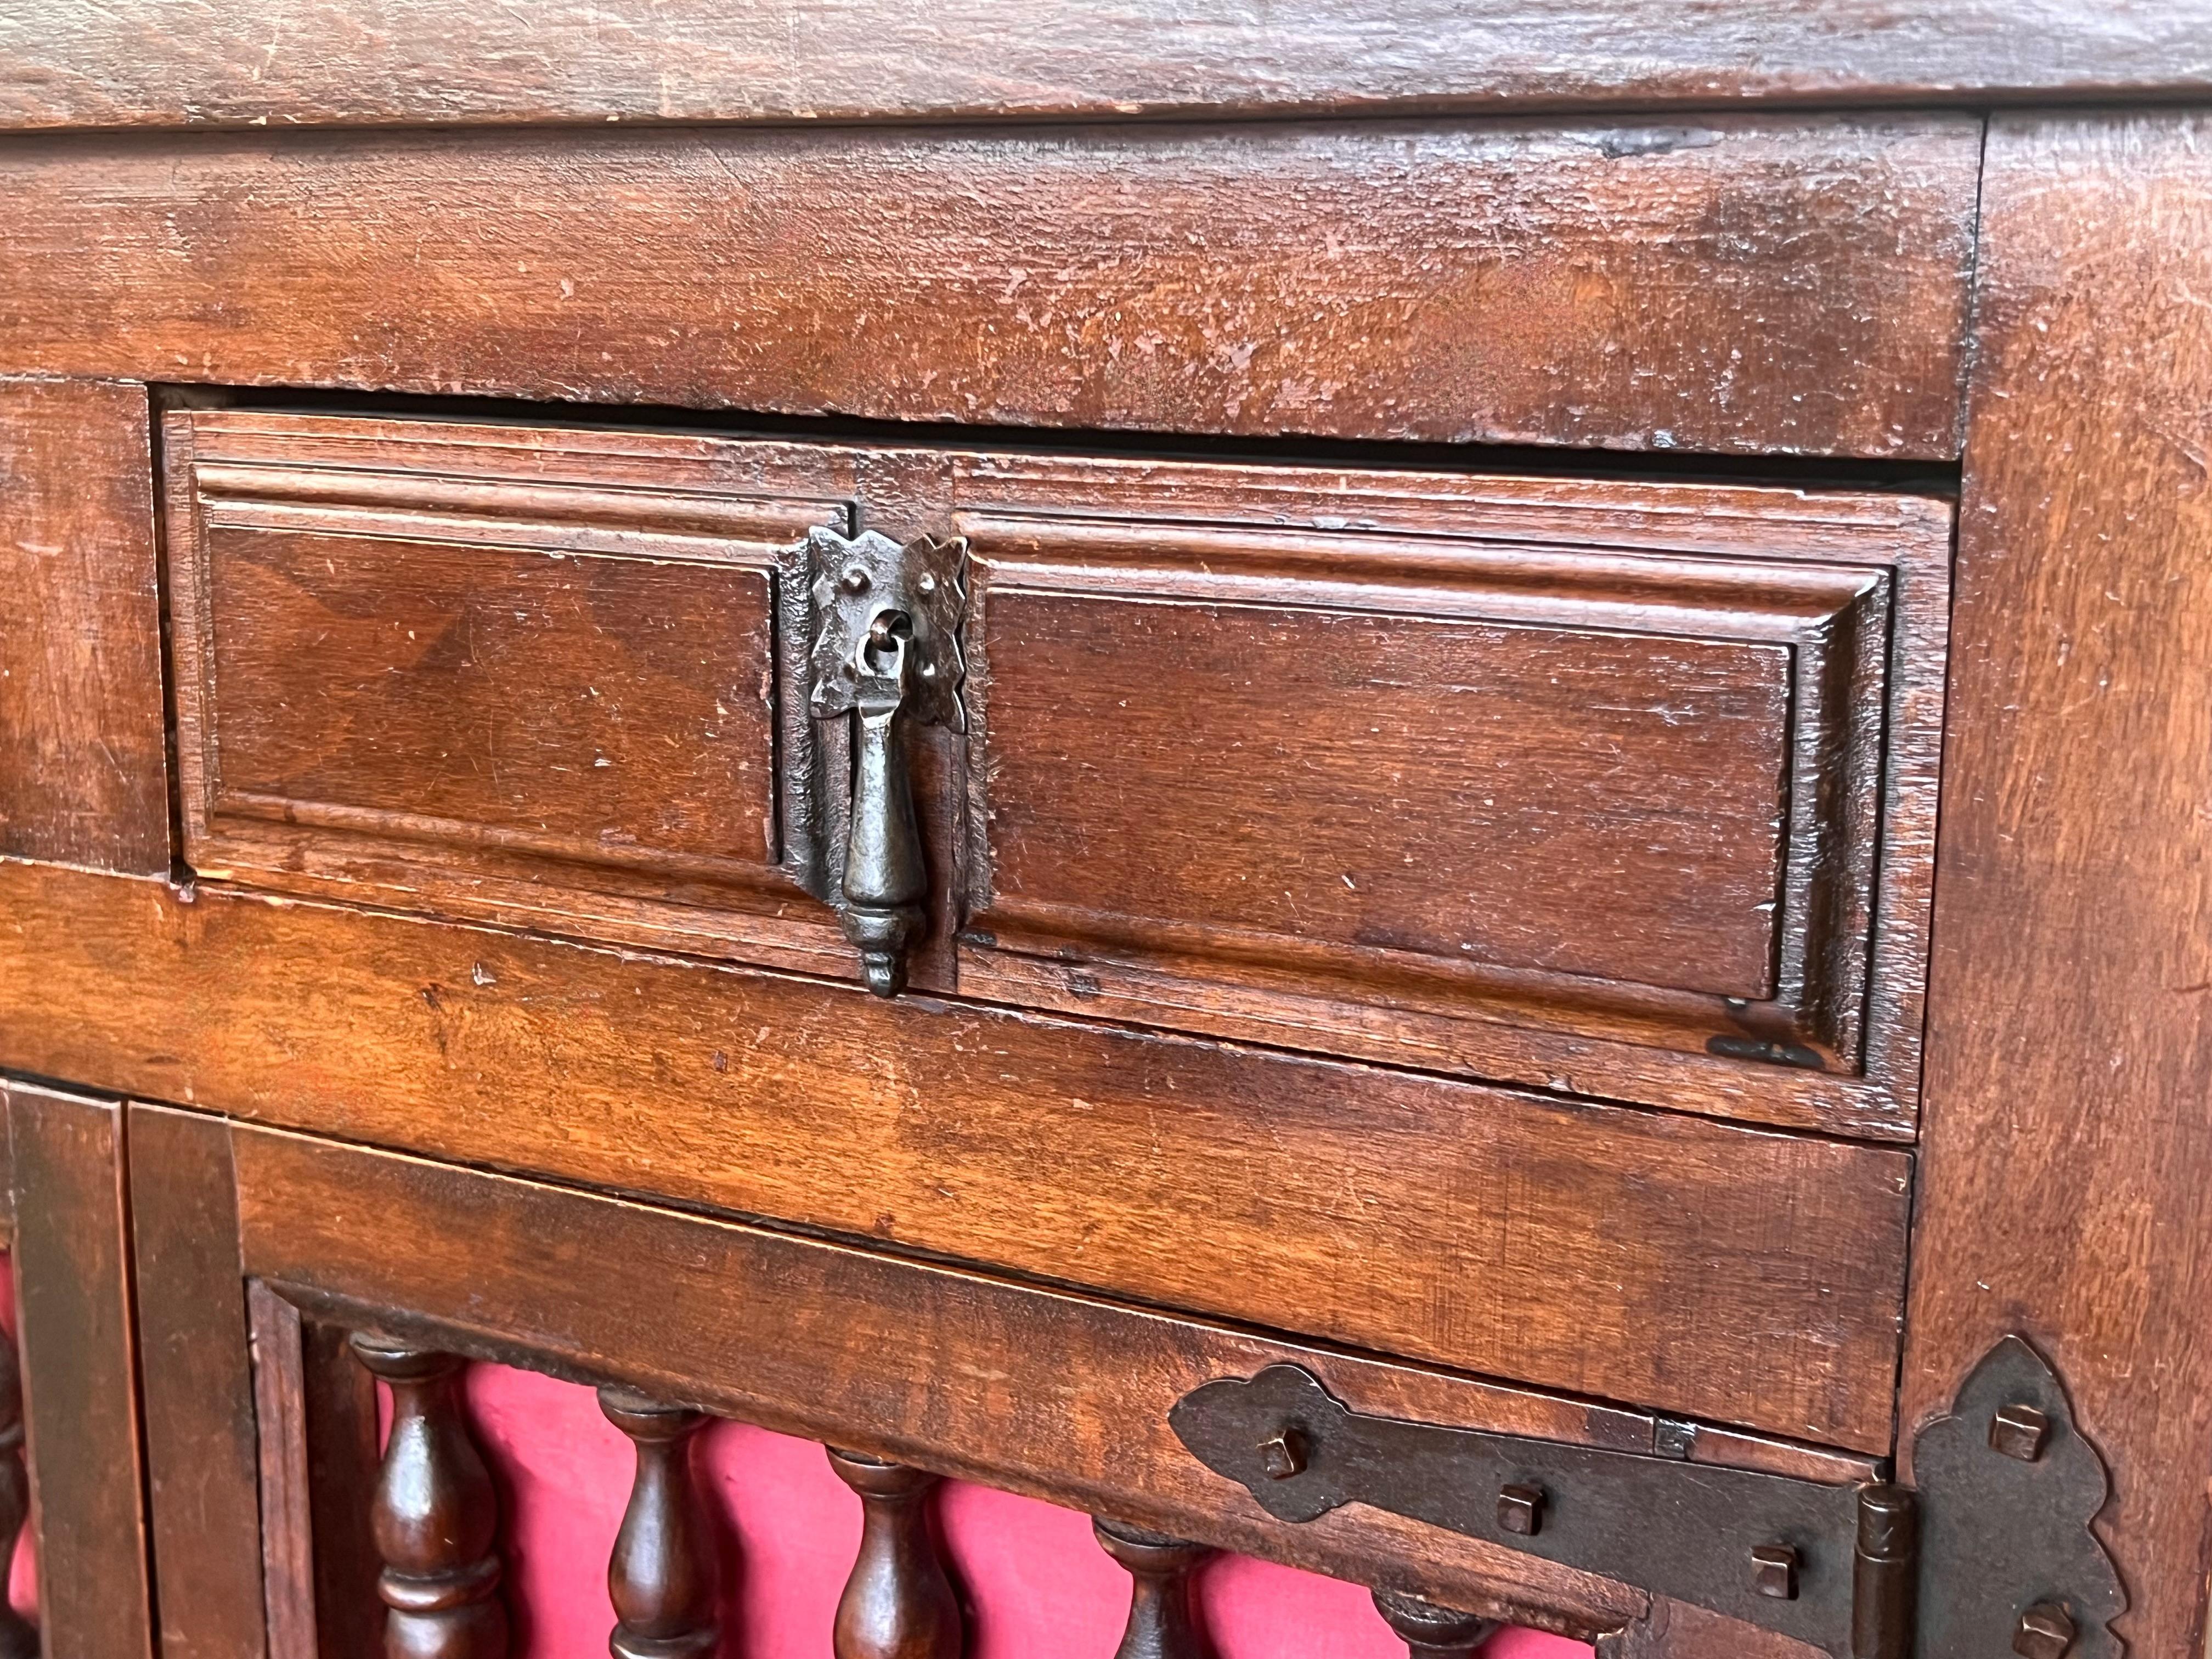 Spanish Carved Walnut Chest of Drawers, Nightstands or Narrow Console, 1920s For Sale 4